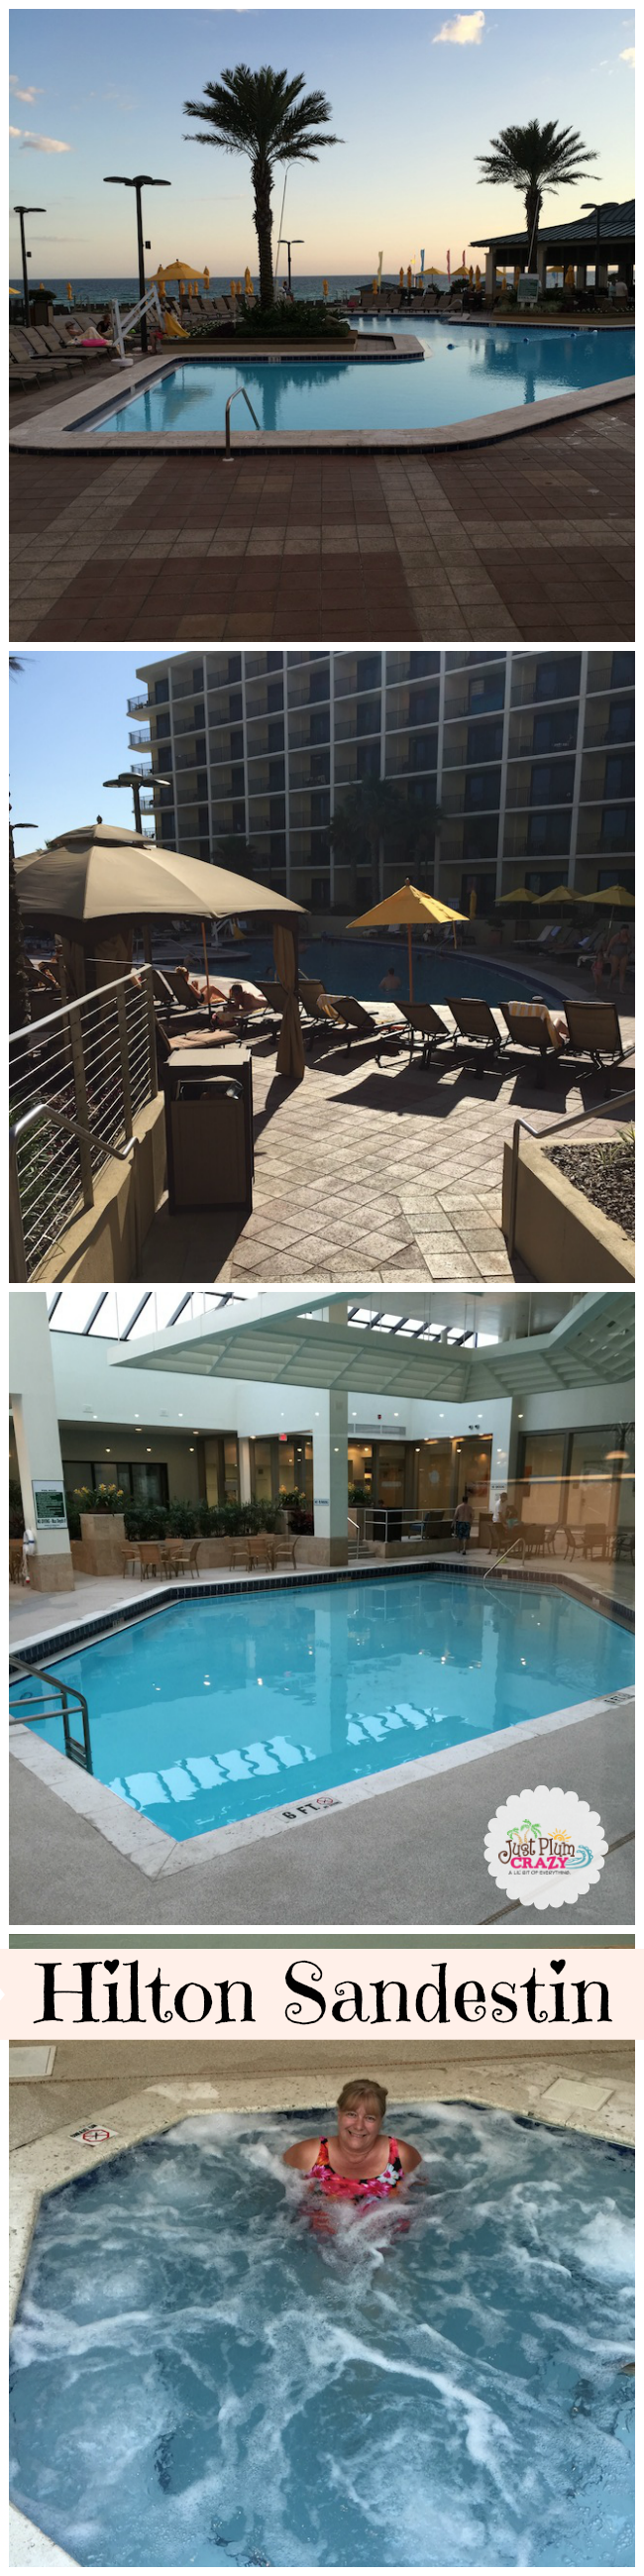 Hilton Sandestin is the perfect place to relax & enjoy the ocean air along with good food. Spend the day at the pool, eat by the ocean & watch the sun set.